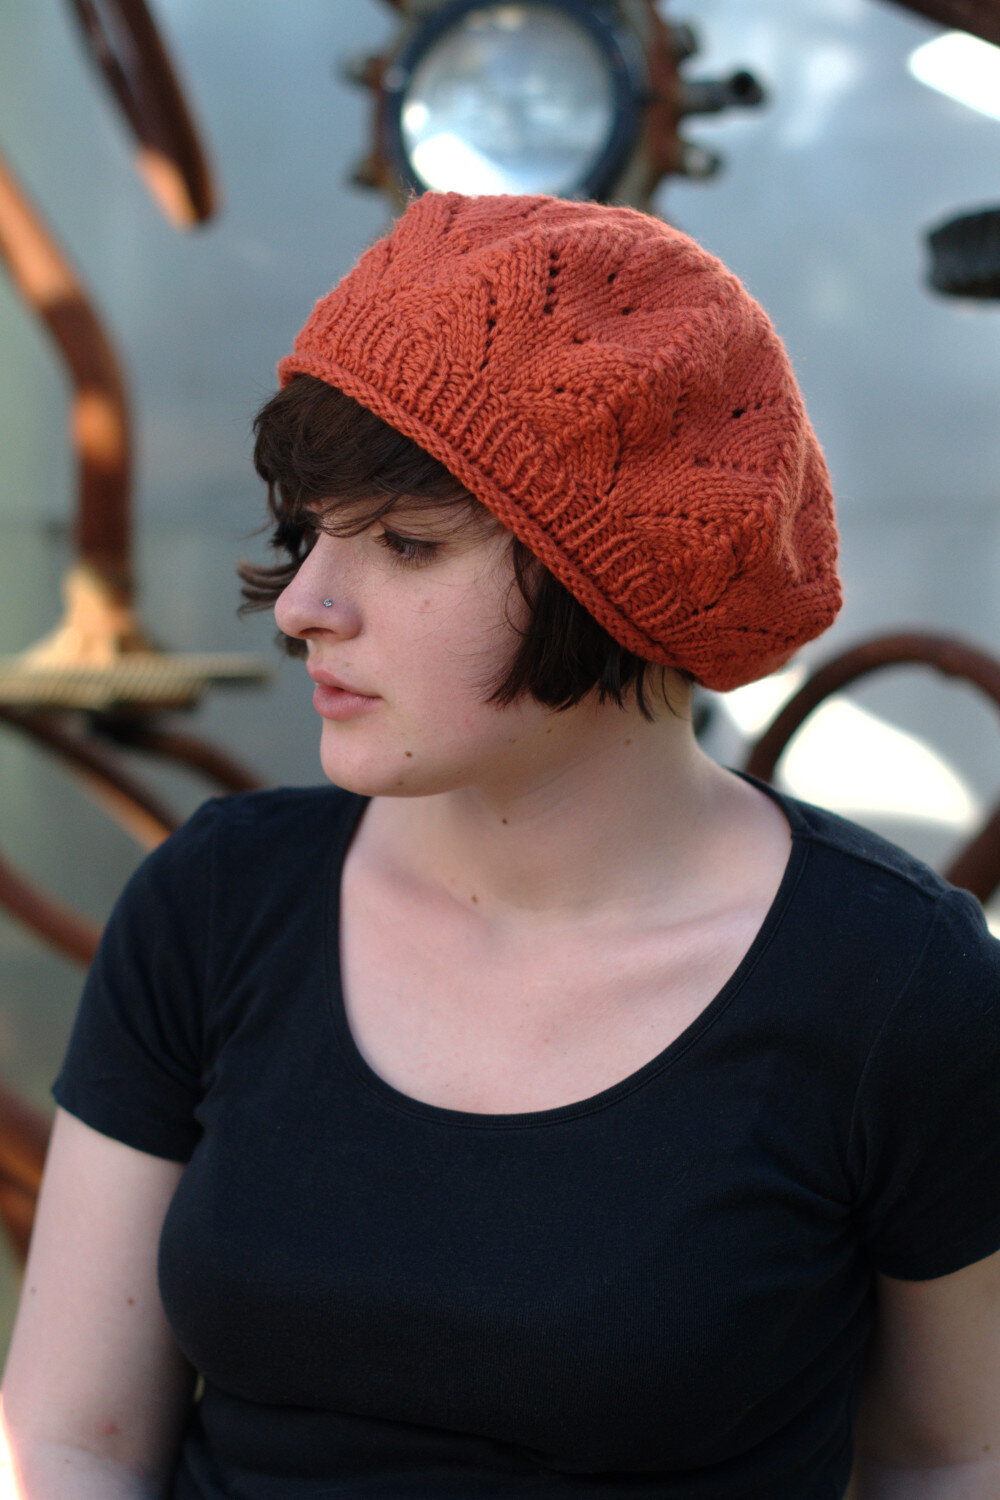 Meret hand knitting beret pattern for worsted weight yarn